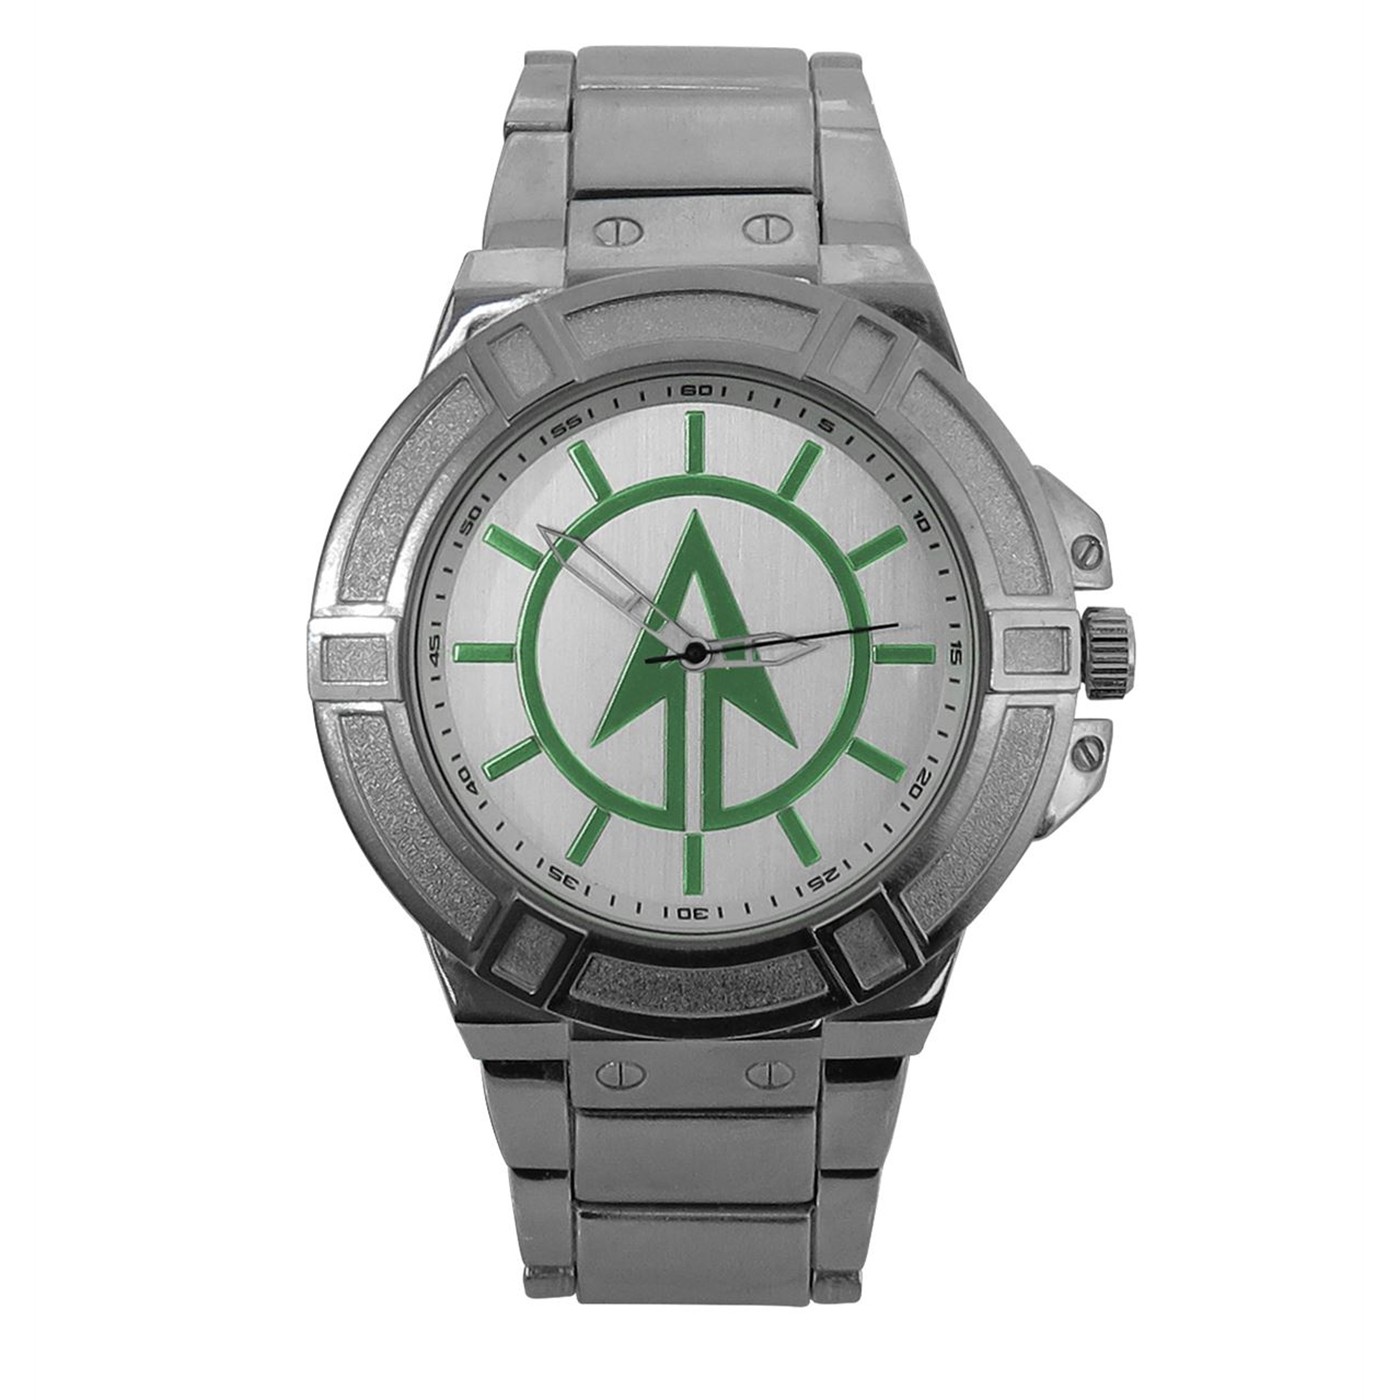 Green Arrow Symbol Watch with Metal Band